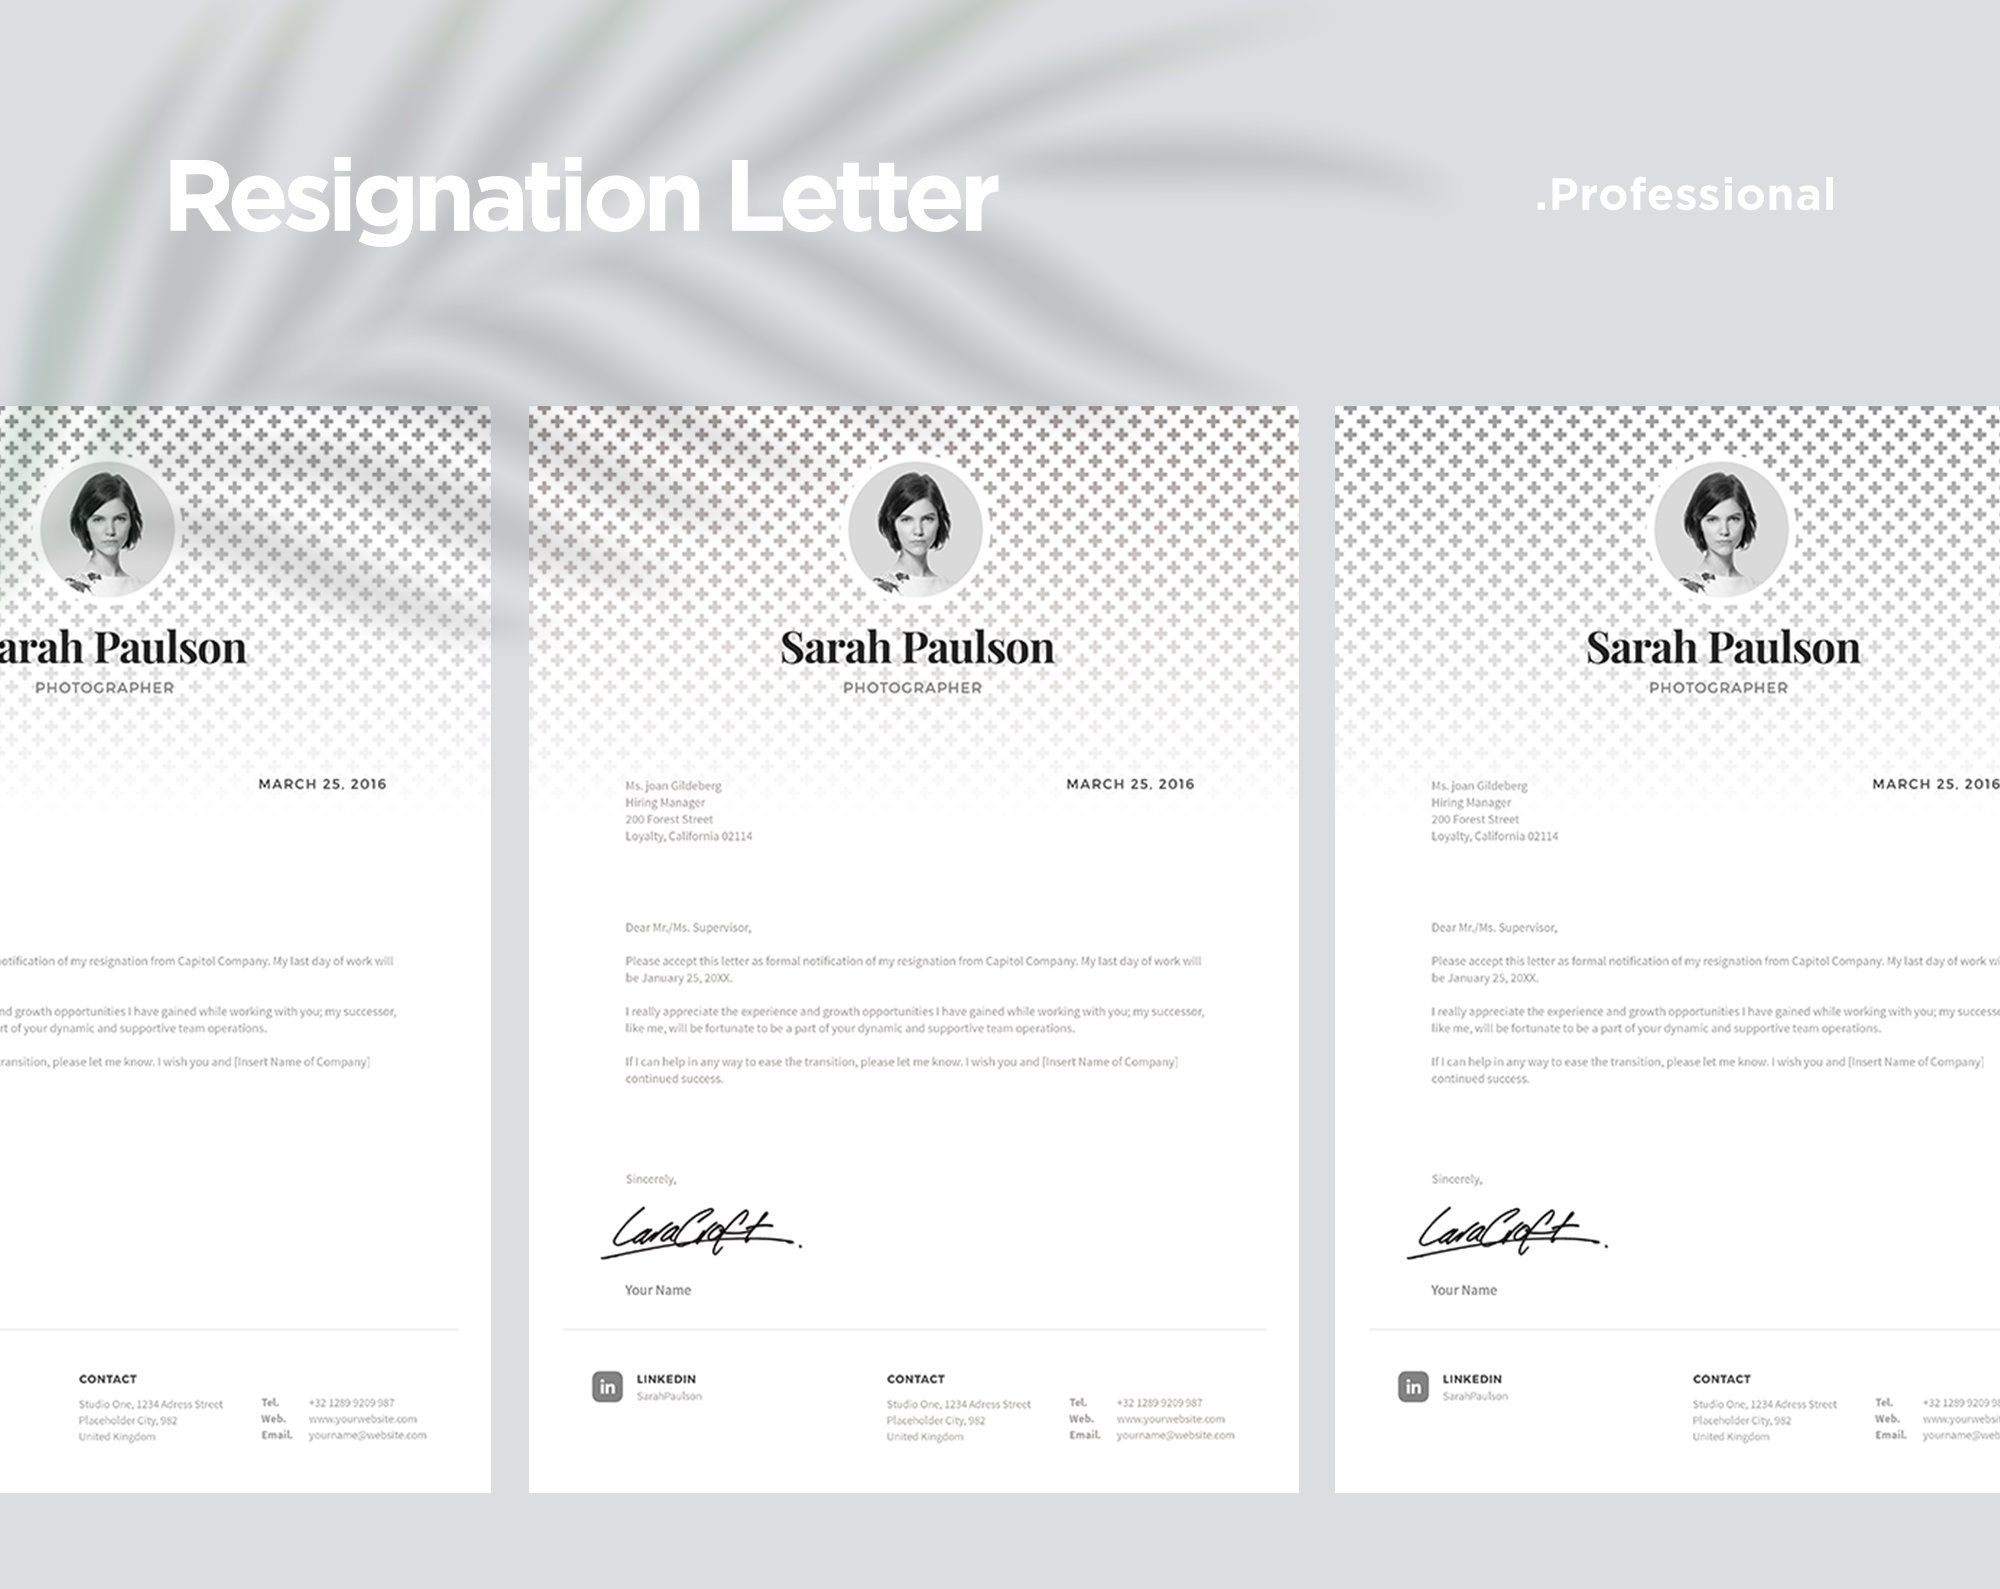 Resignation Letter Template cover image.